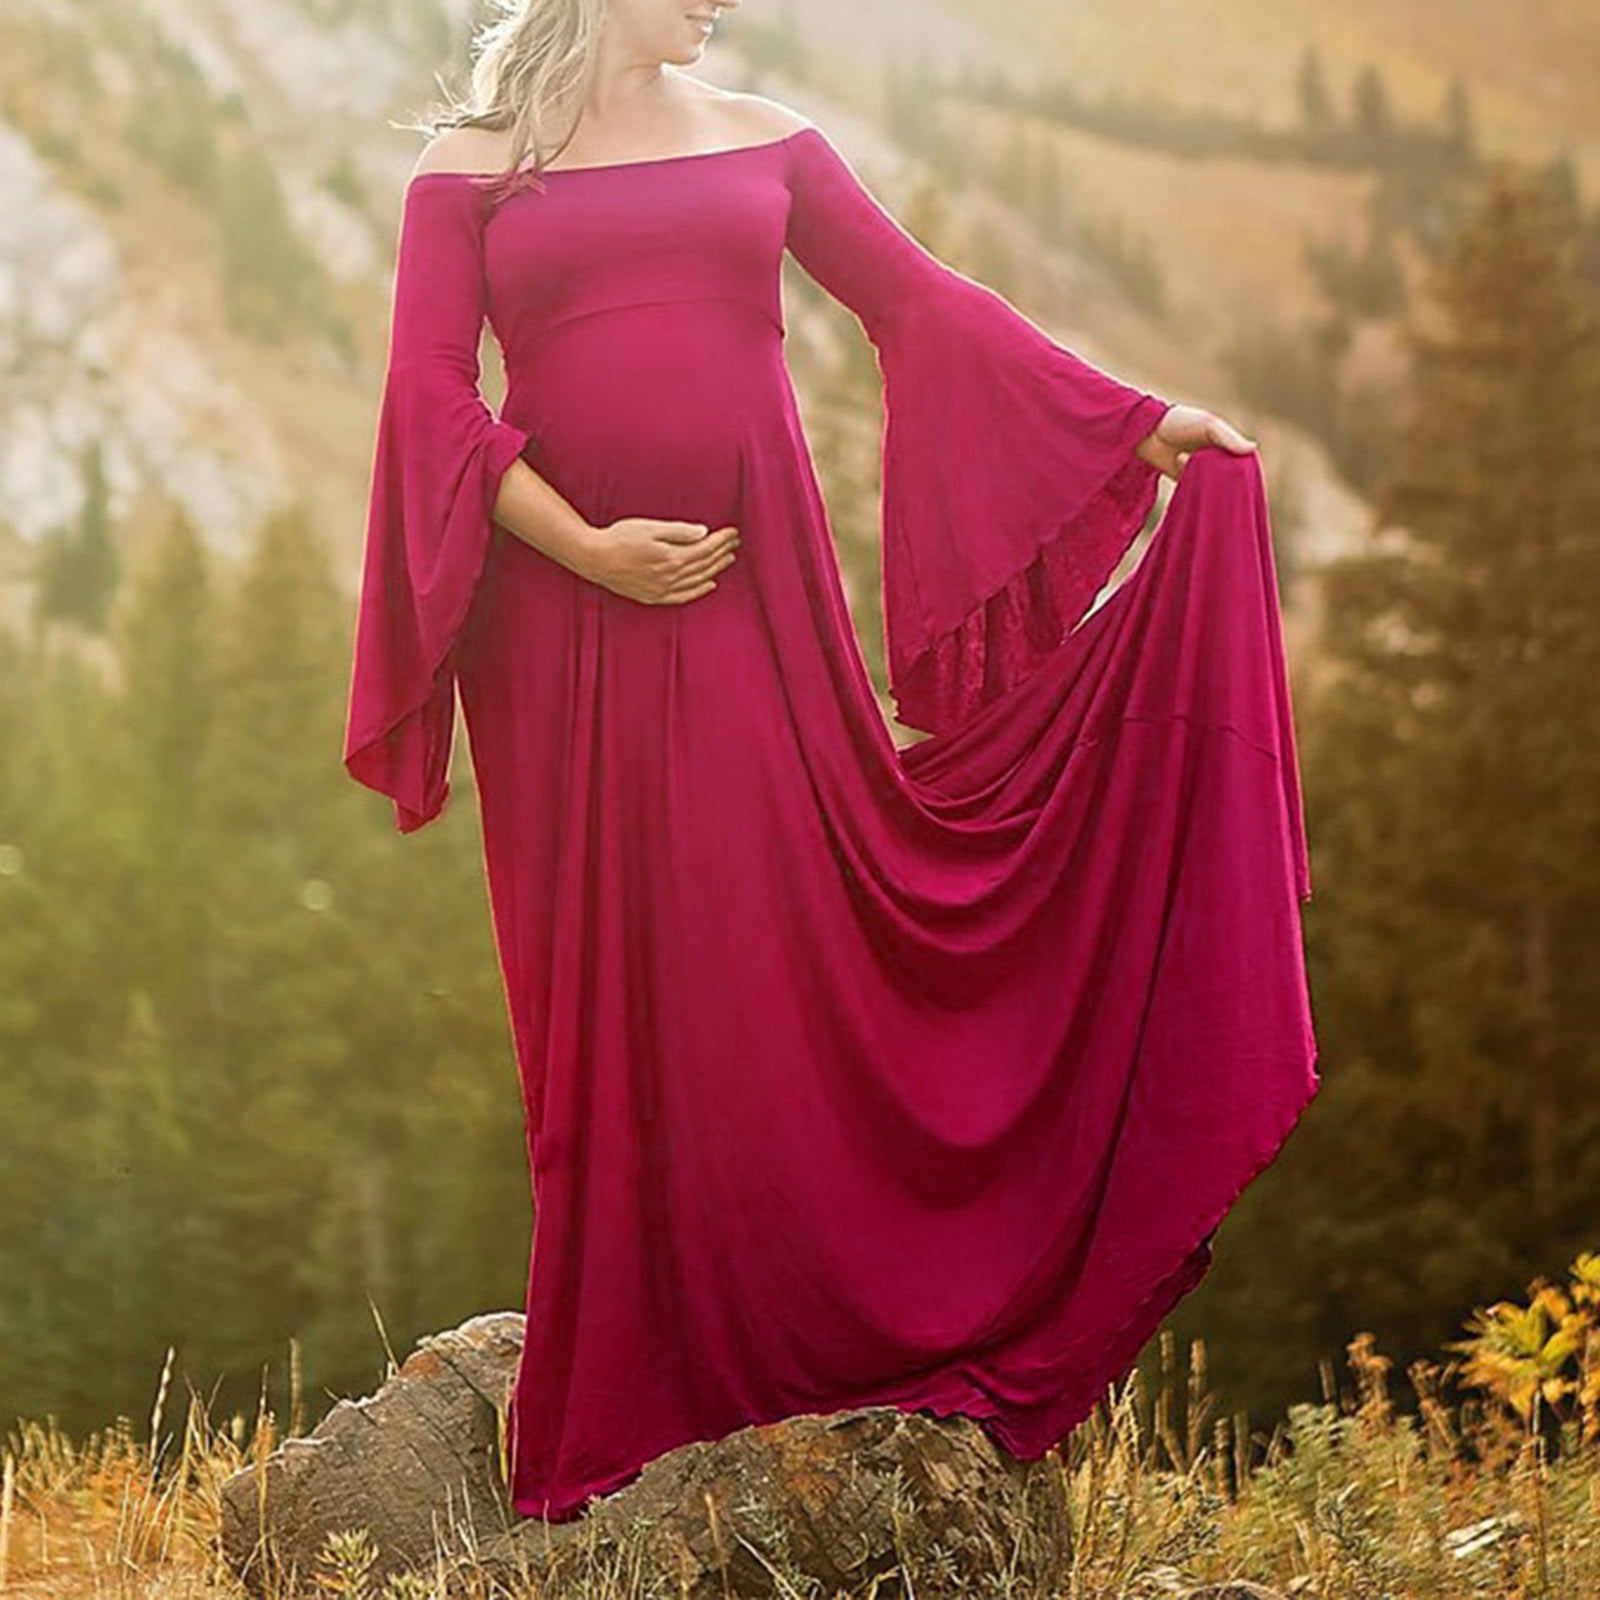 Stunning Maternity Photo Shoot Dresses and Gowns for a Baby Shower-hkpdtq2012.edu.vn